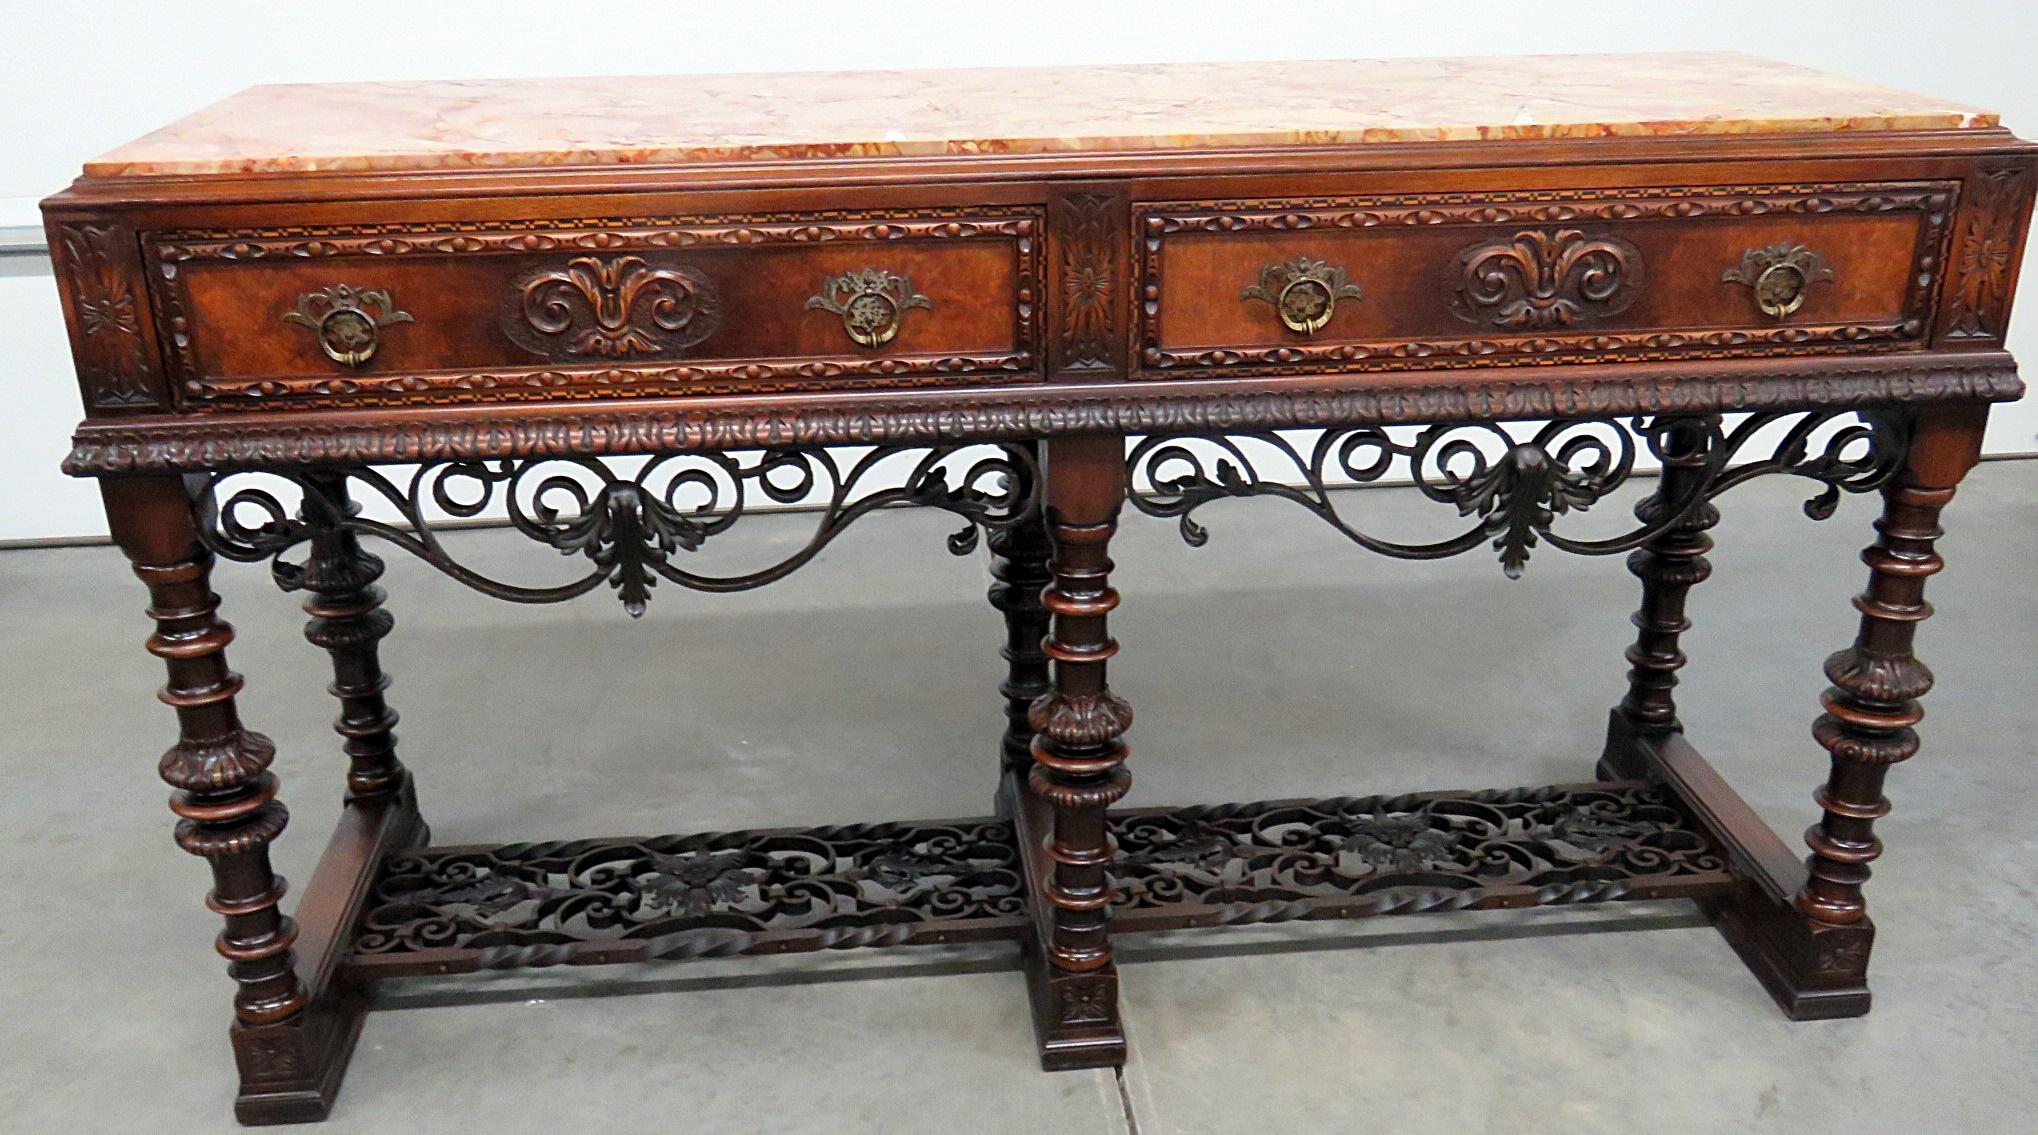 Spanish style marble-top 3-drawer sideboard with iron accents.